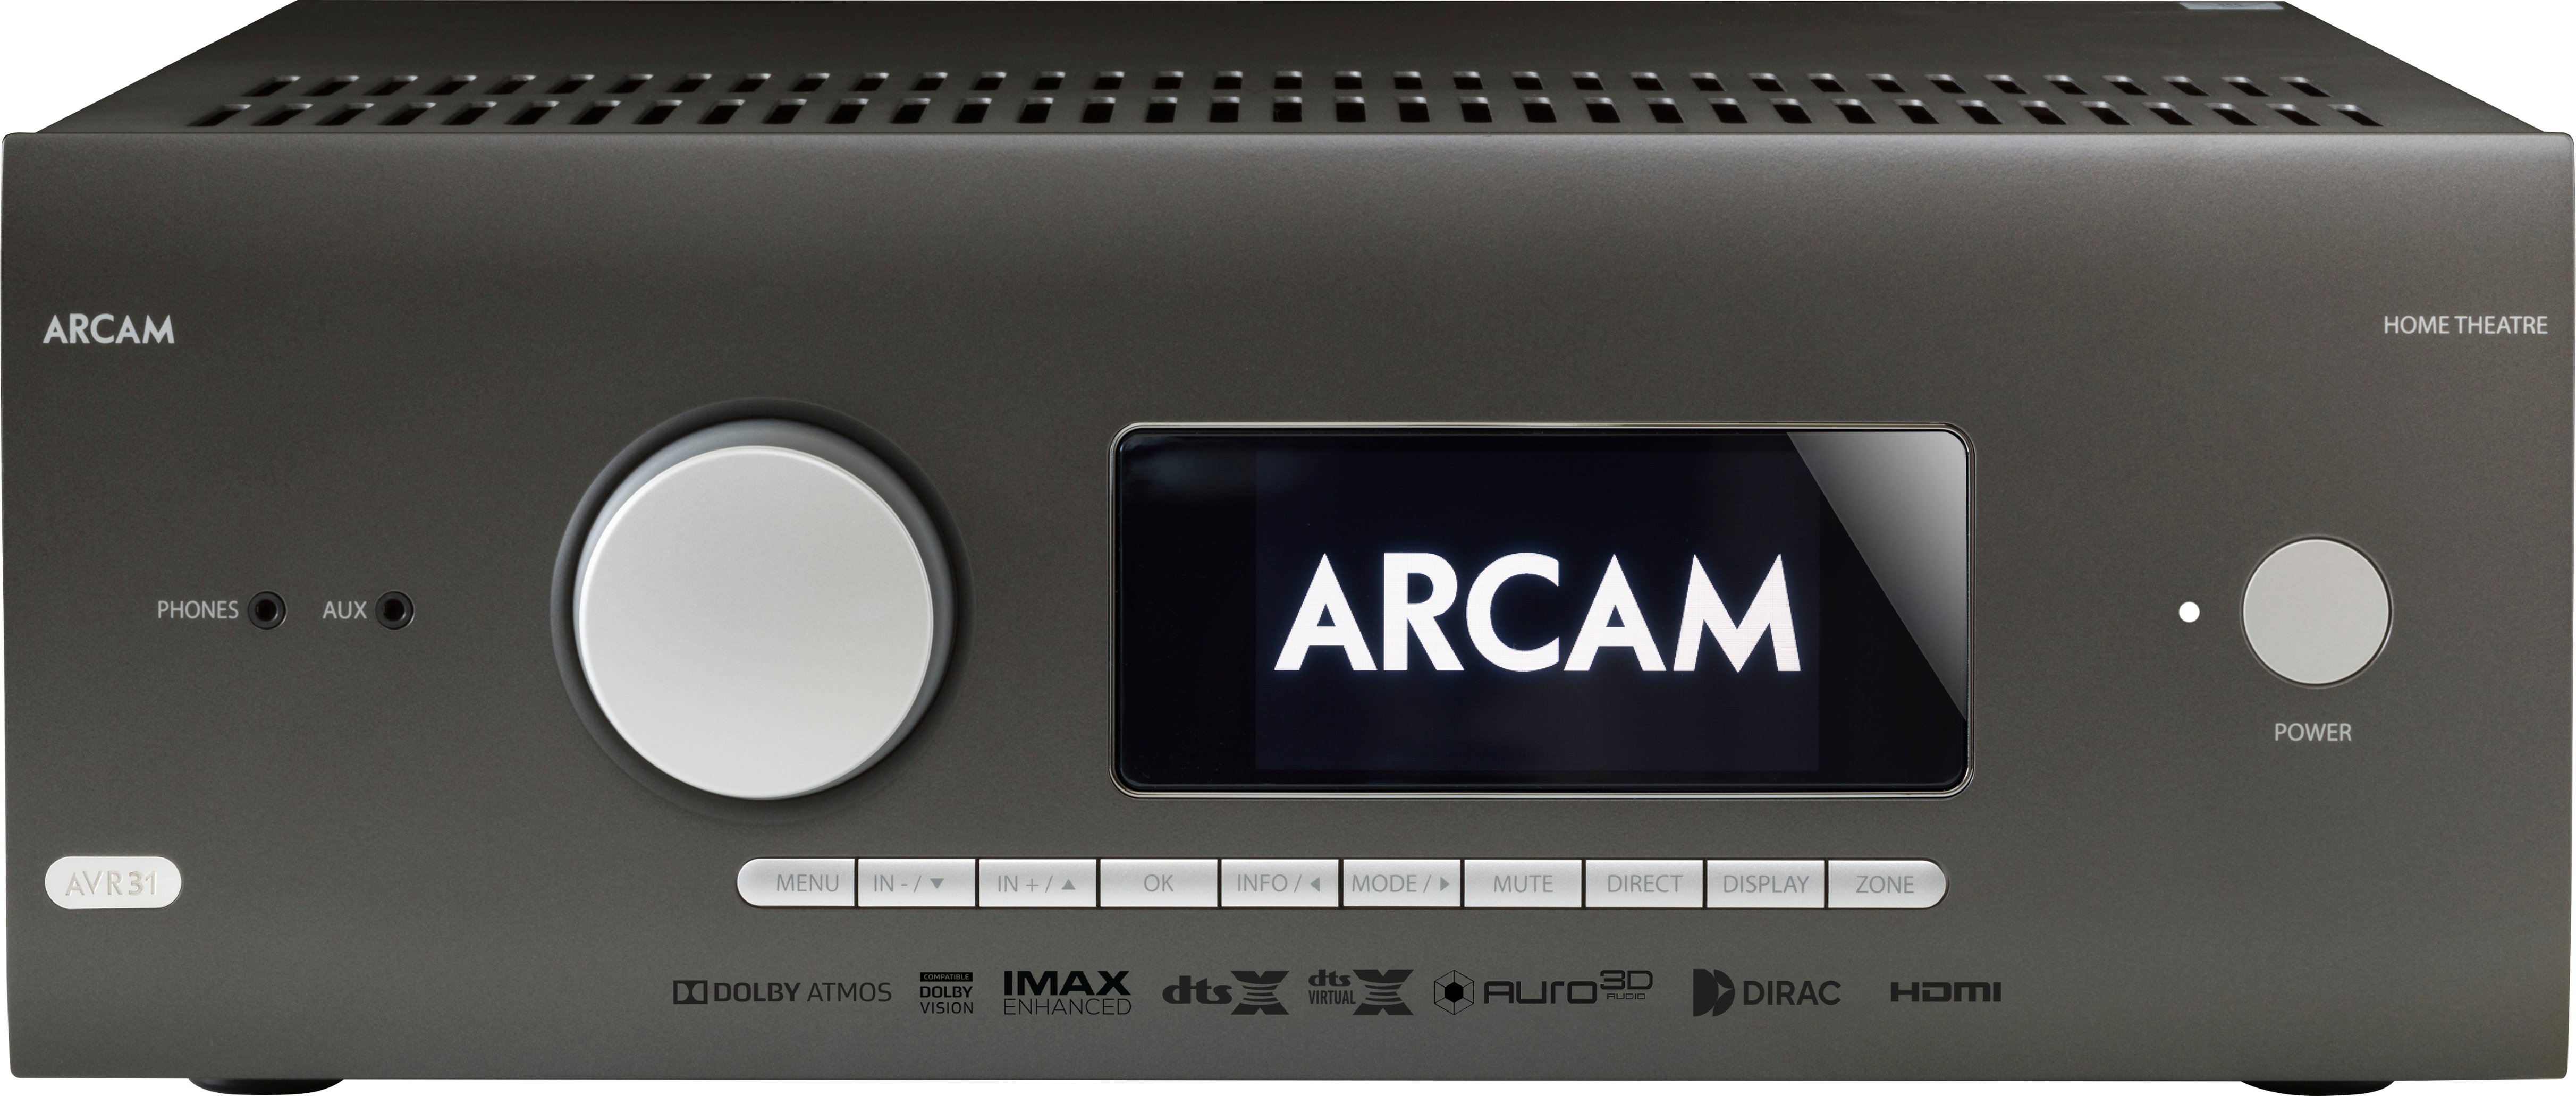 Angle View: Arcam - AVR31 1260W 7.1 Ch. Bluetooth capable With Google Cast and 8K Ultra HD HDR Compatible A/V Home Theater Receiver - Gray